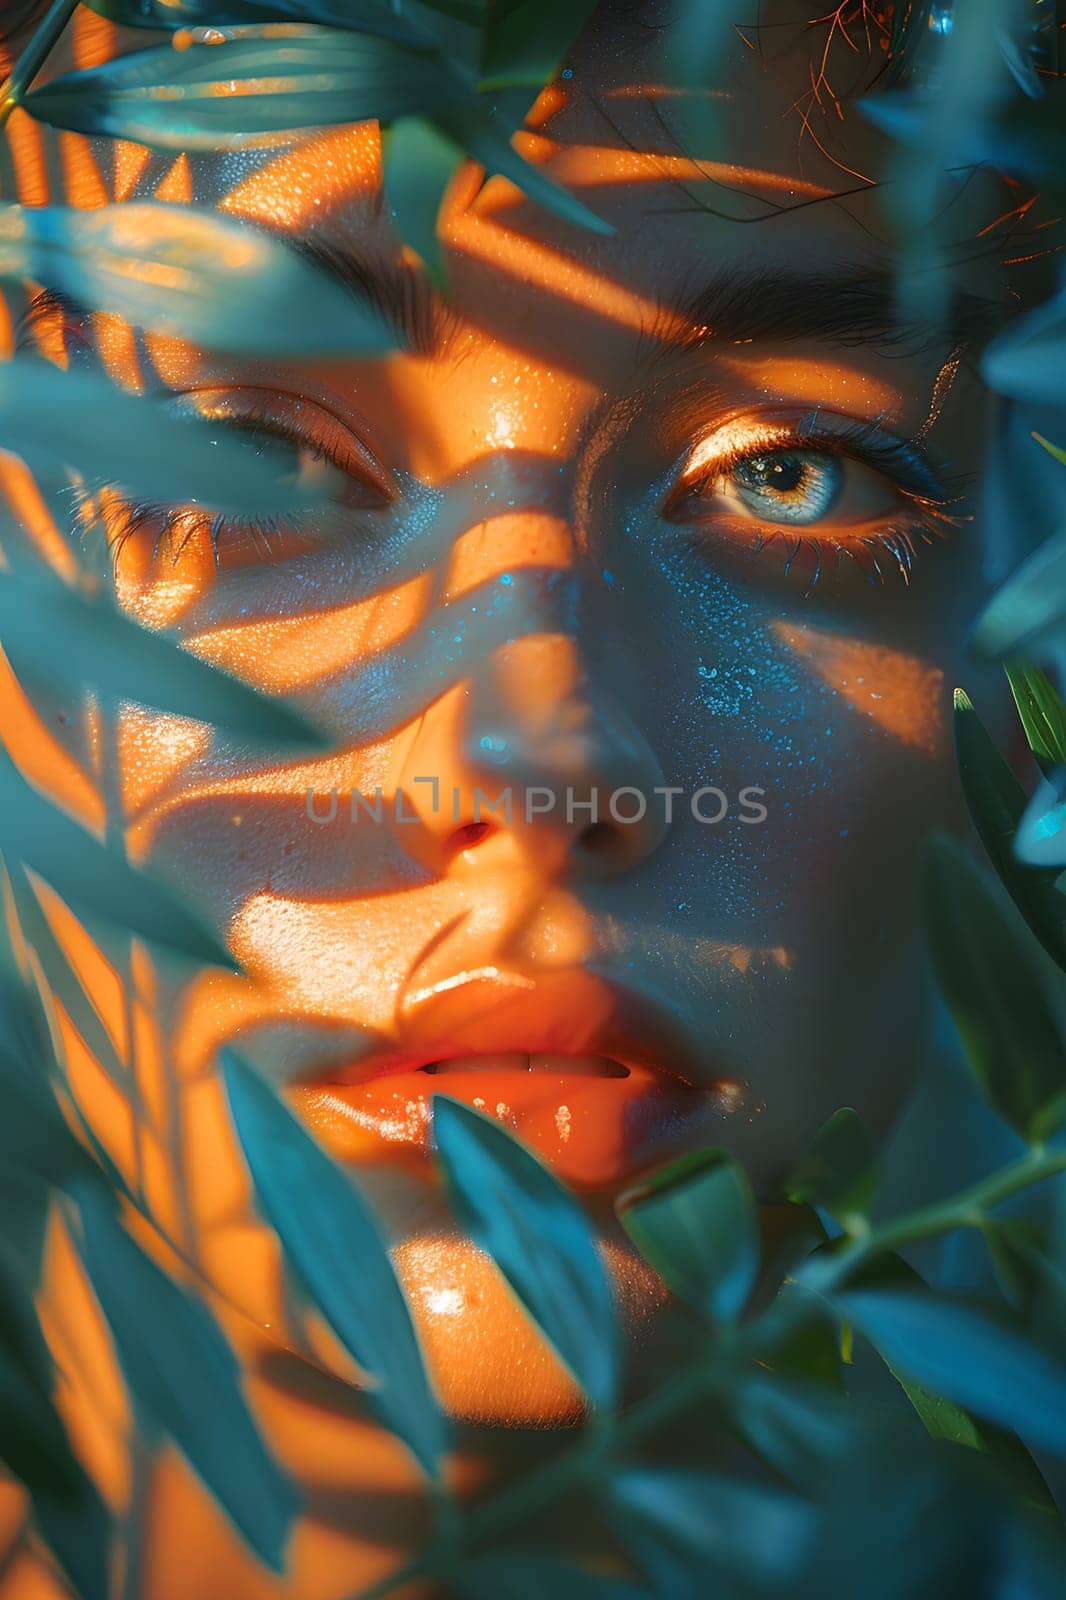 Macro photography capturing the beauty of a womans face surrounded by leaves. The electric blue eyelashes stand out against the dark metal pattern, creating a mesmerizing visual arts composition